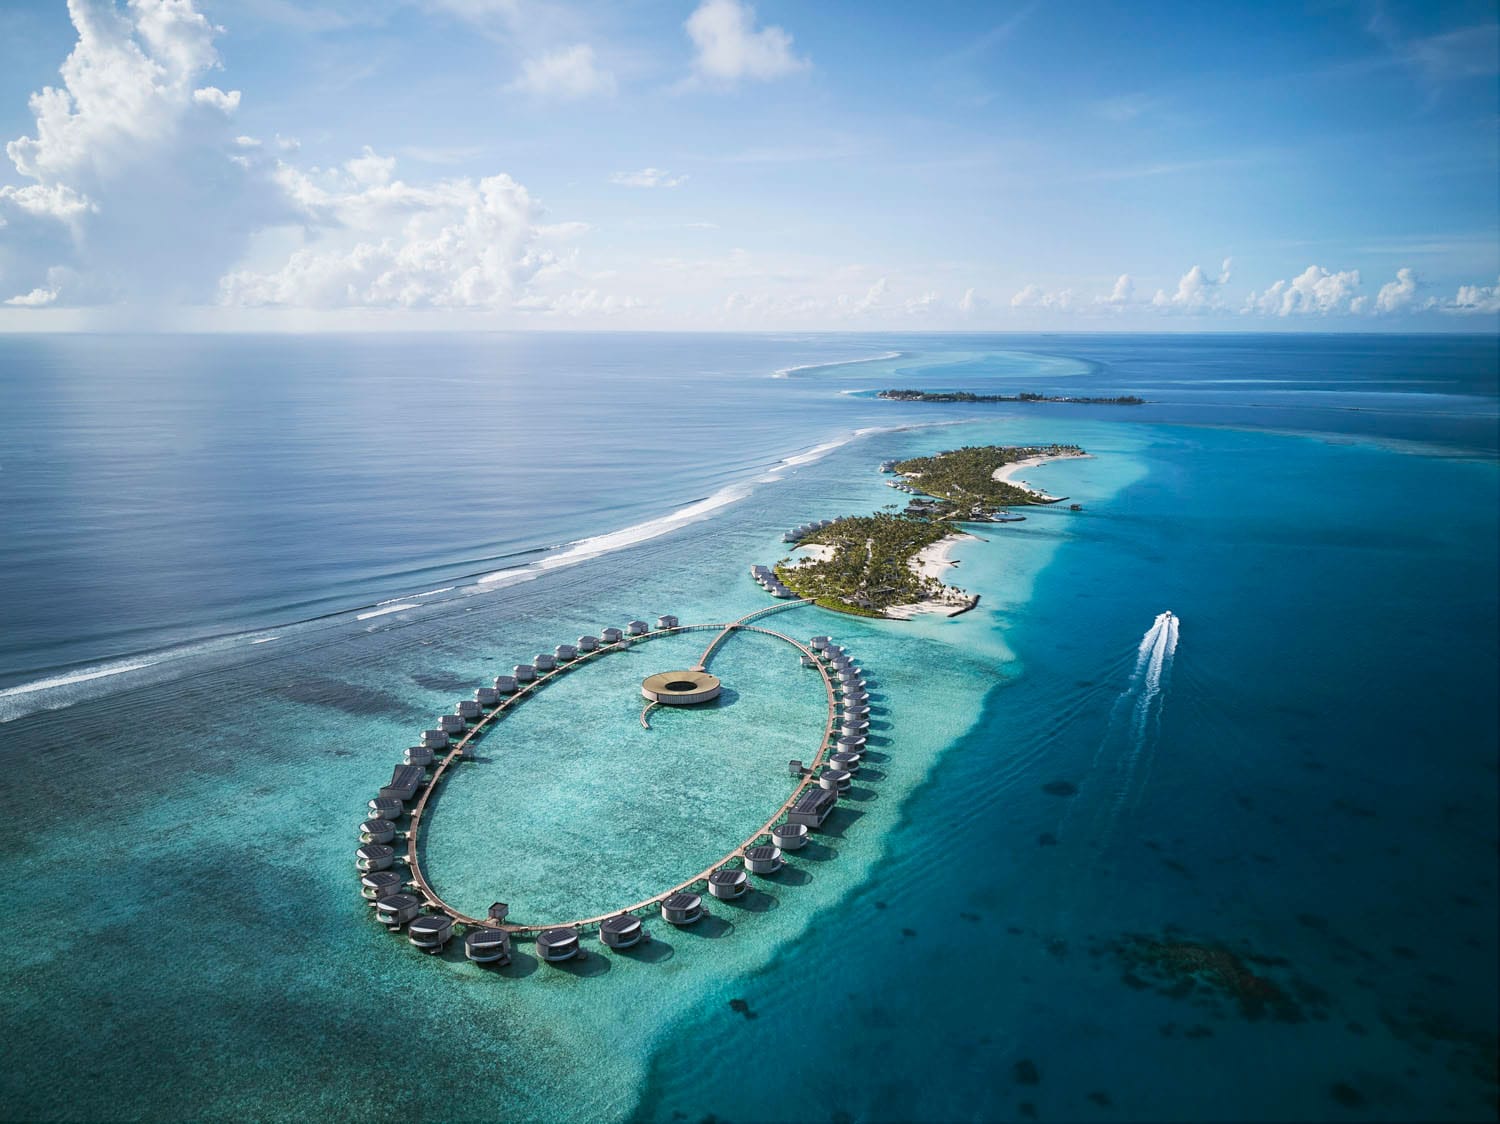 An aerial view of the property and bungalows at The Ritz-Carlton Maldives, Fari Islands.